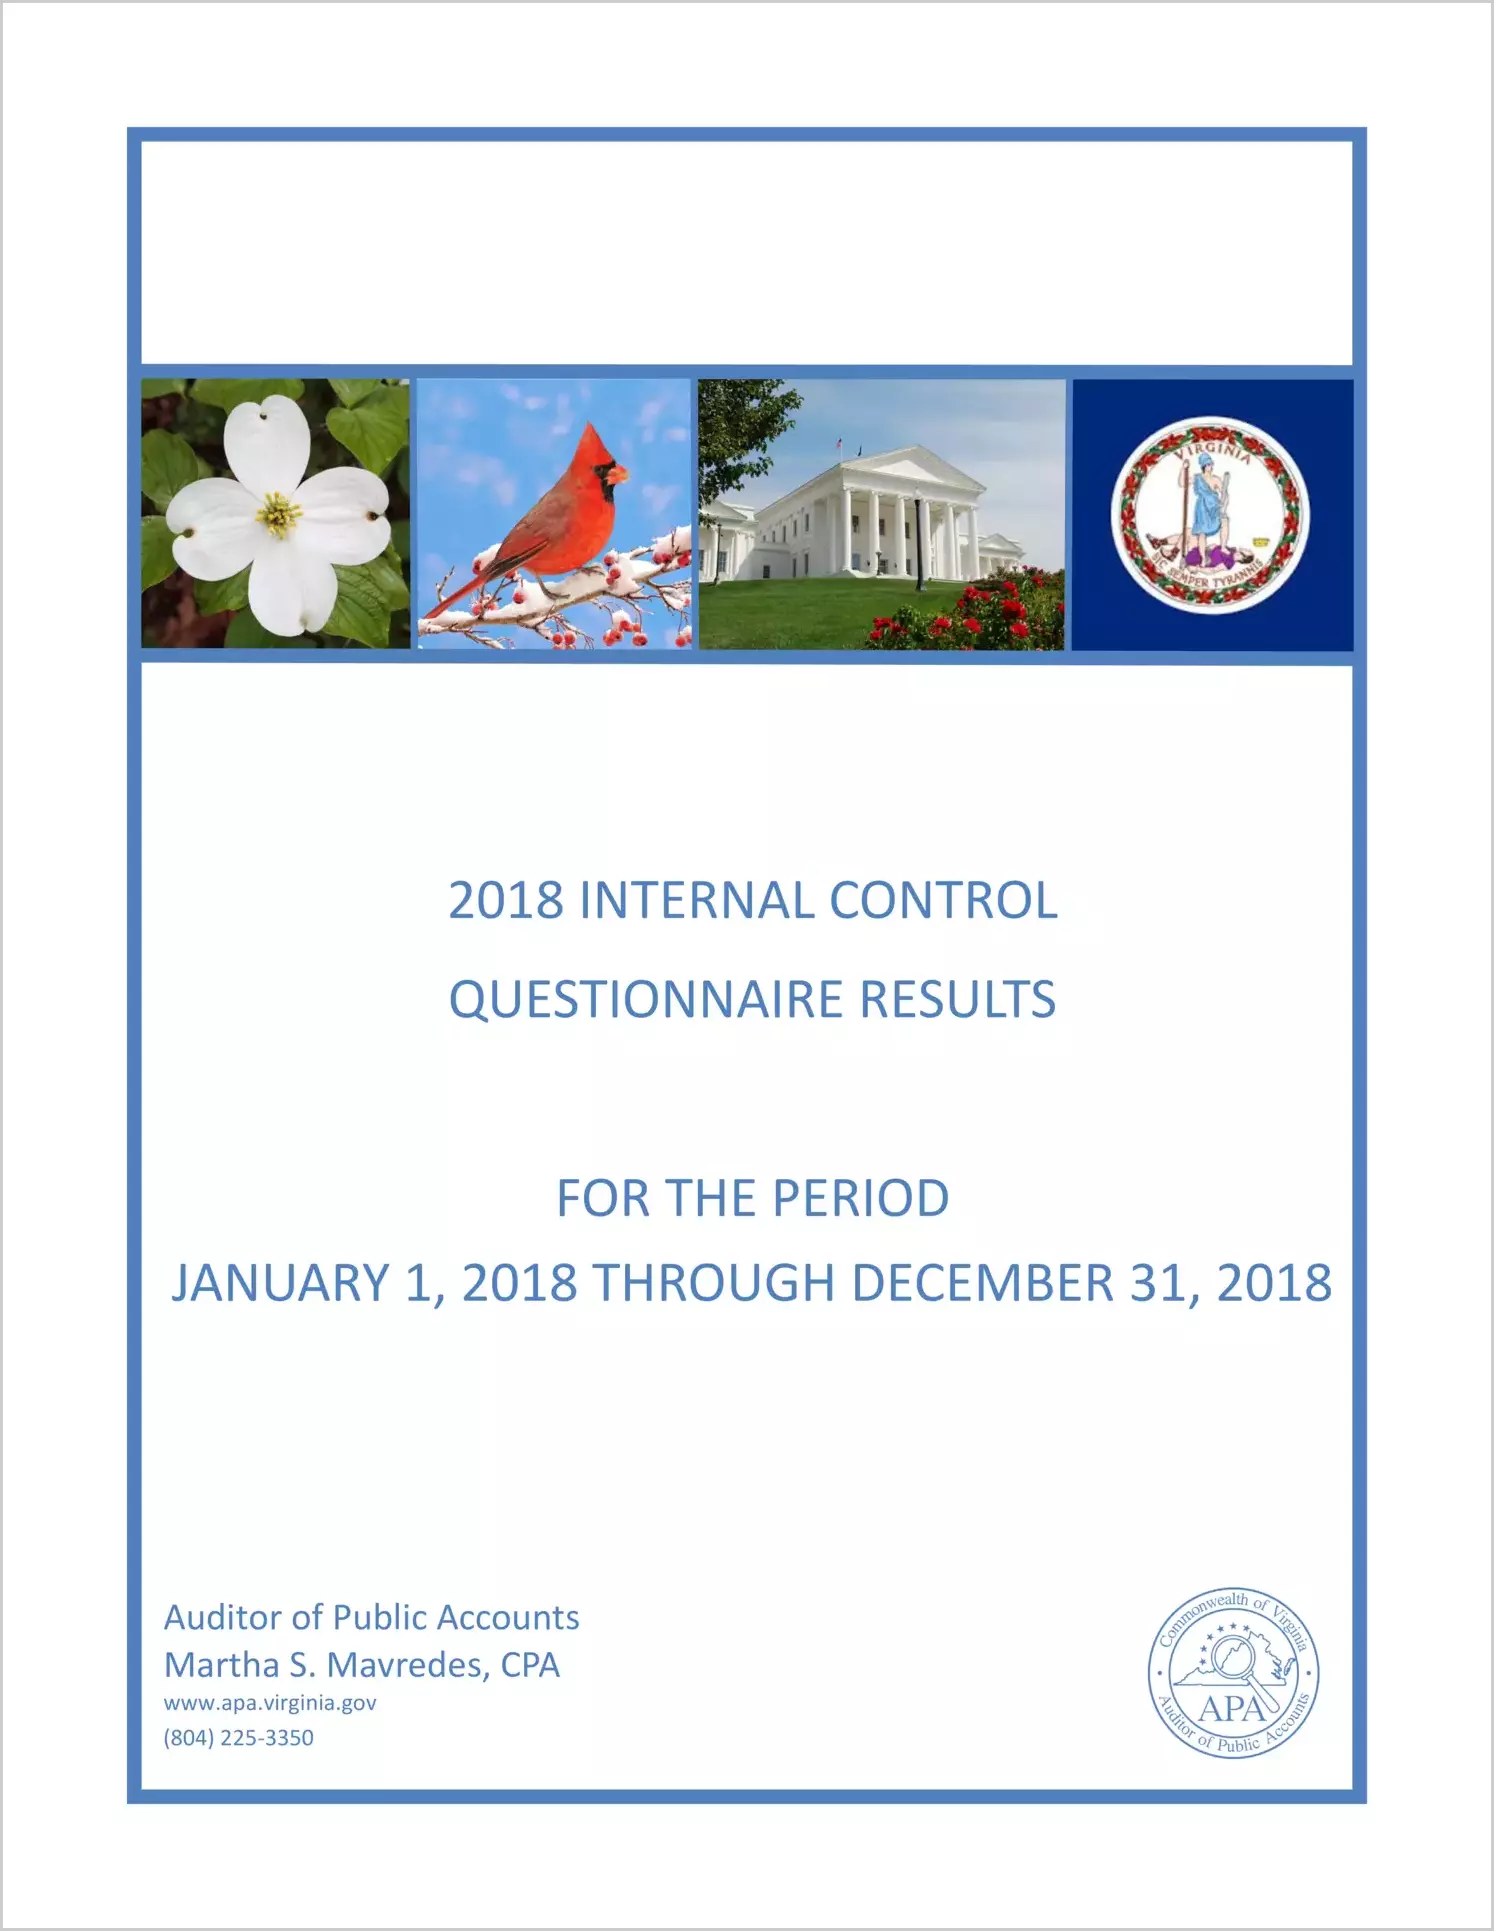 2018 Internal Control Questionnaire Results for the period January 1, 2018 through December 31, 2018